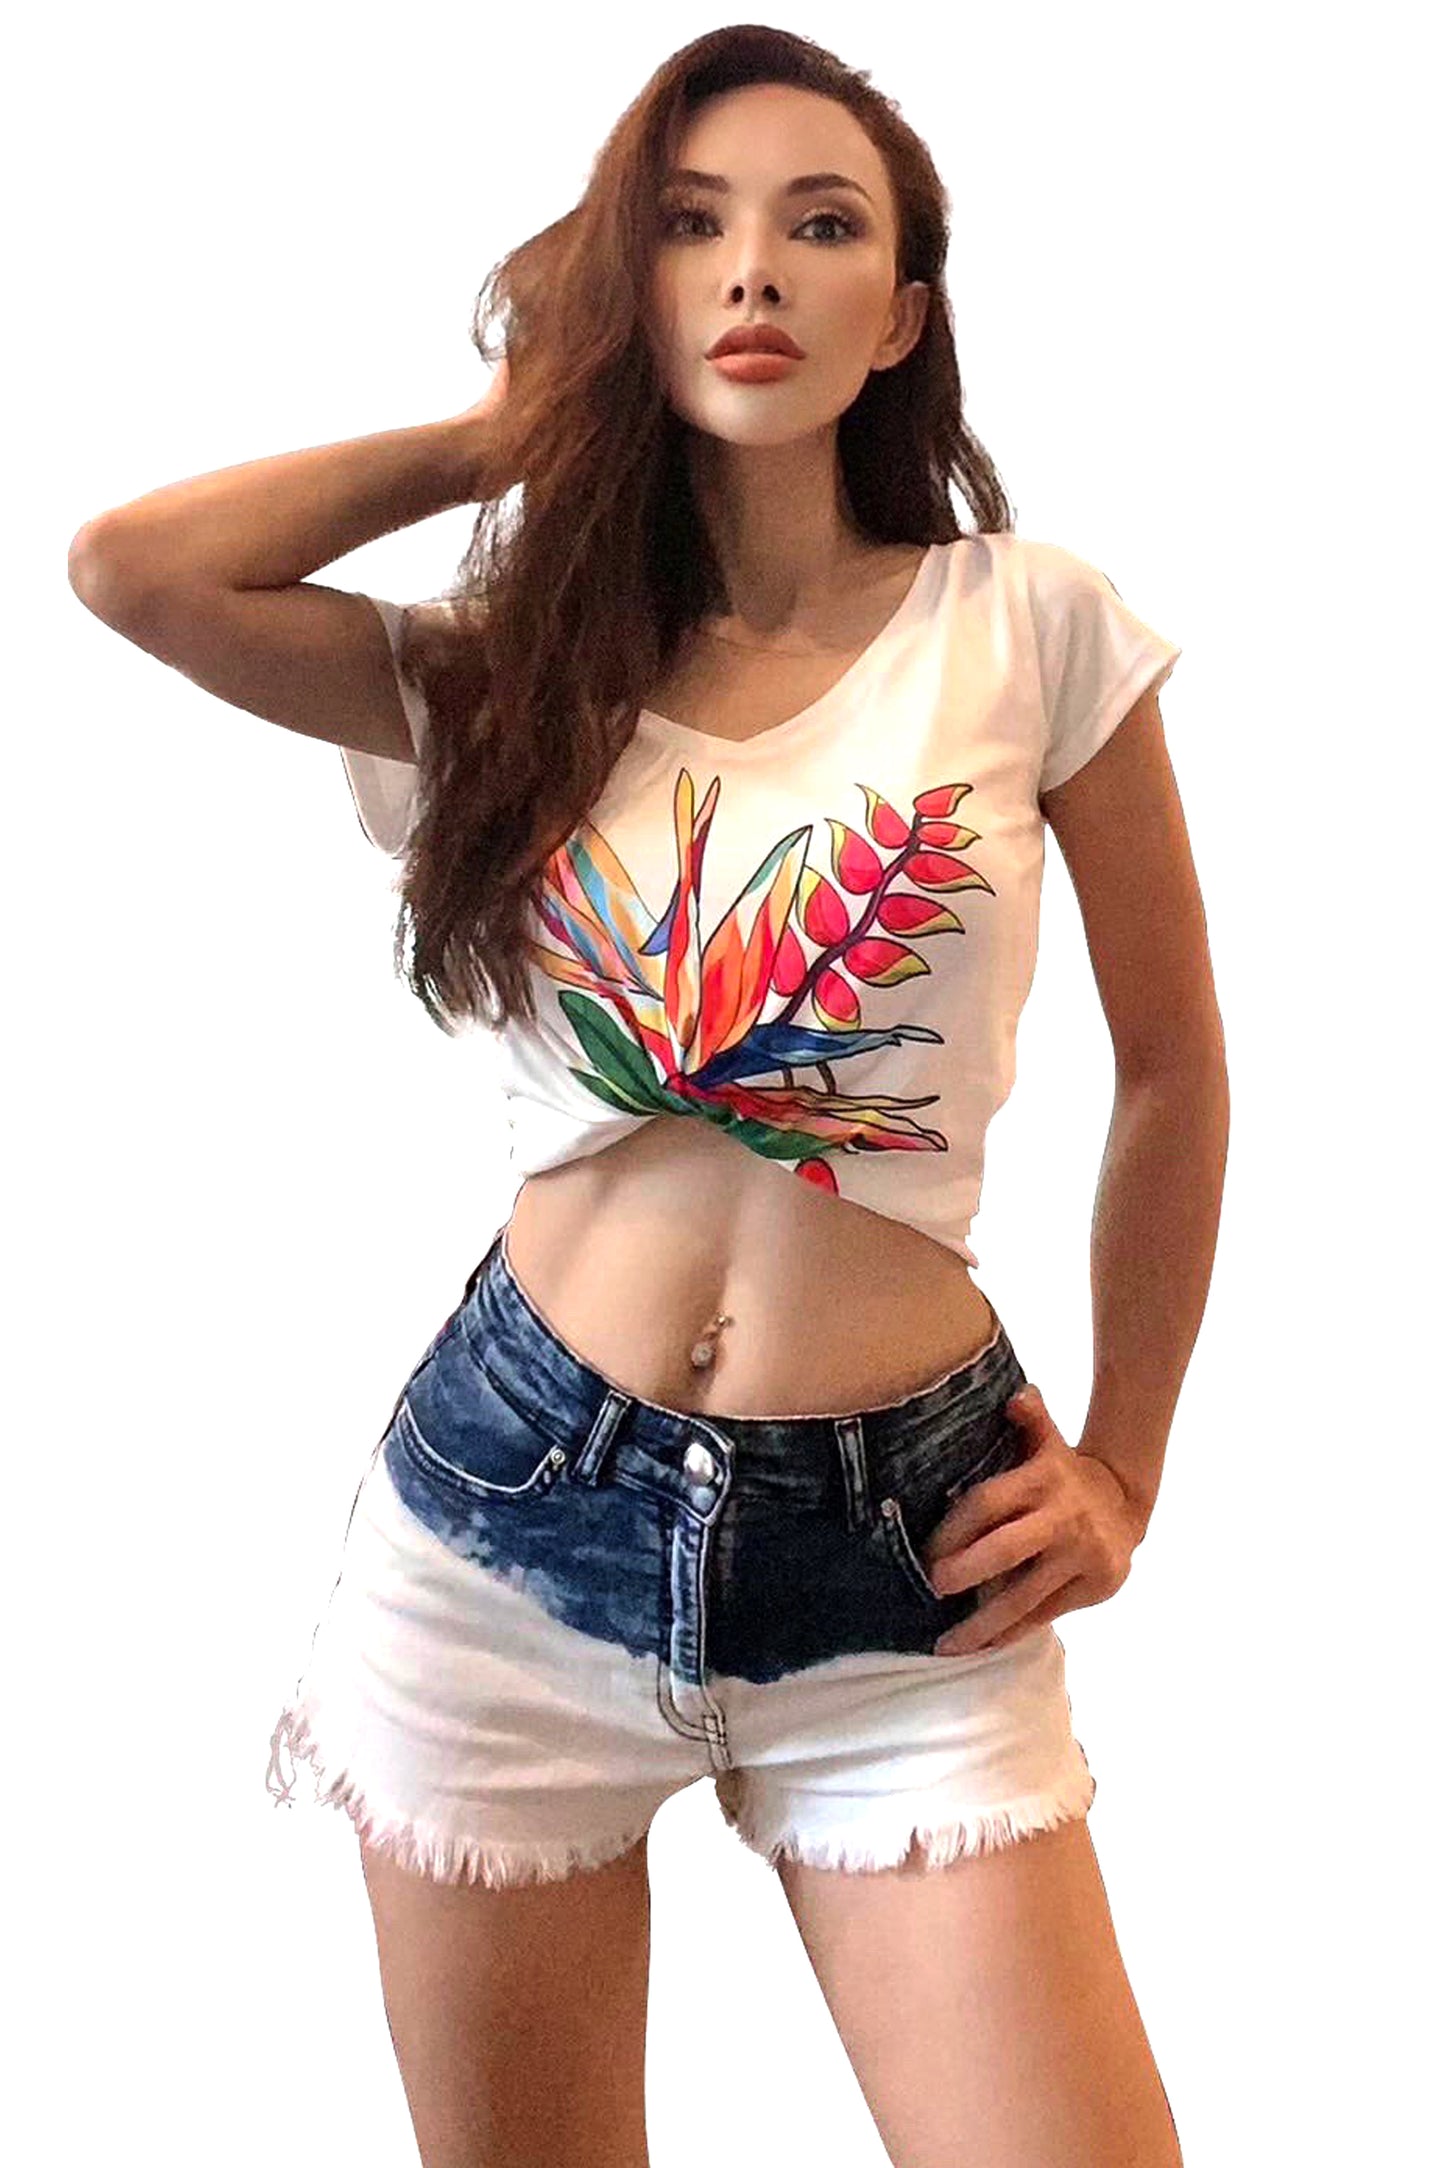 Sunne Tropical Women Top Tee White Loose Fit T-Shirt - Super Soft Light Weight Polyester Spandex - Heliconia Bird Of Paradise